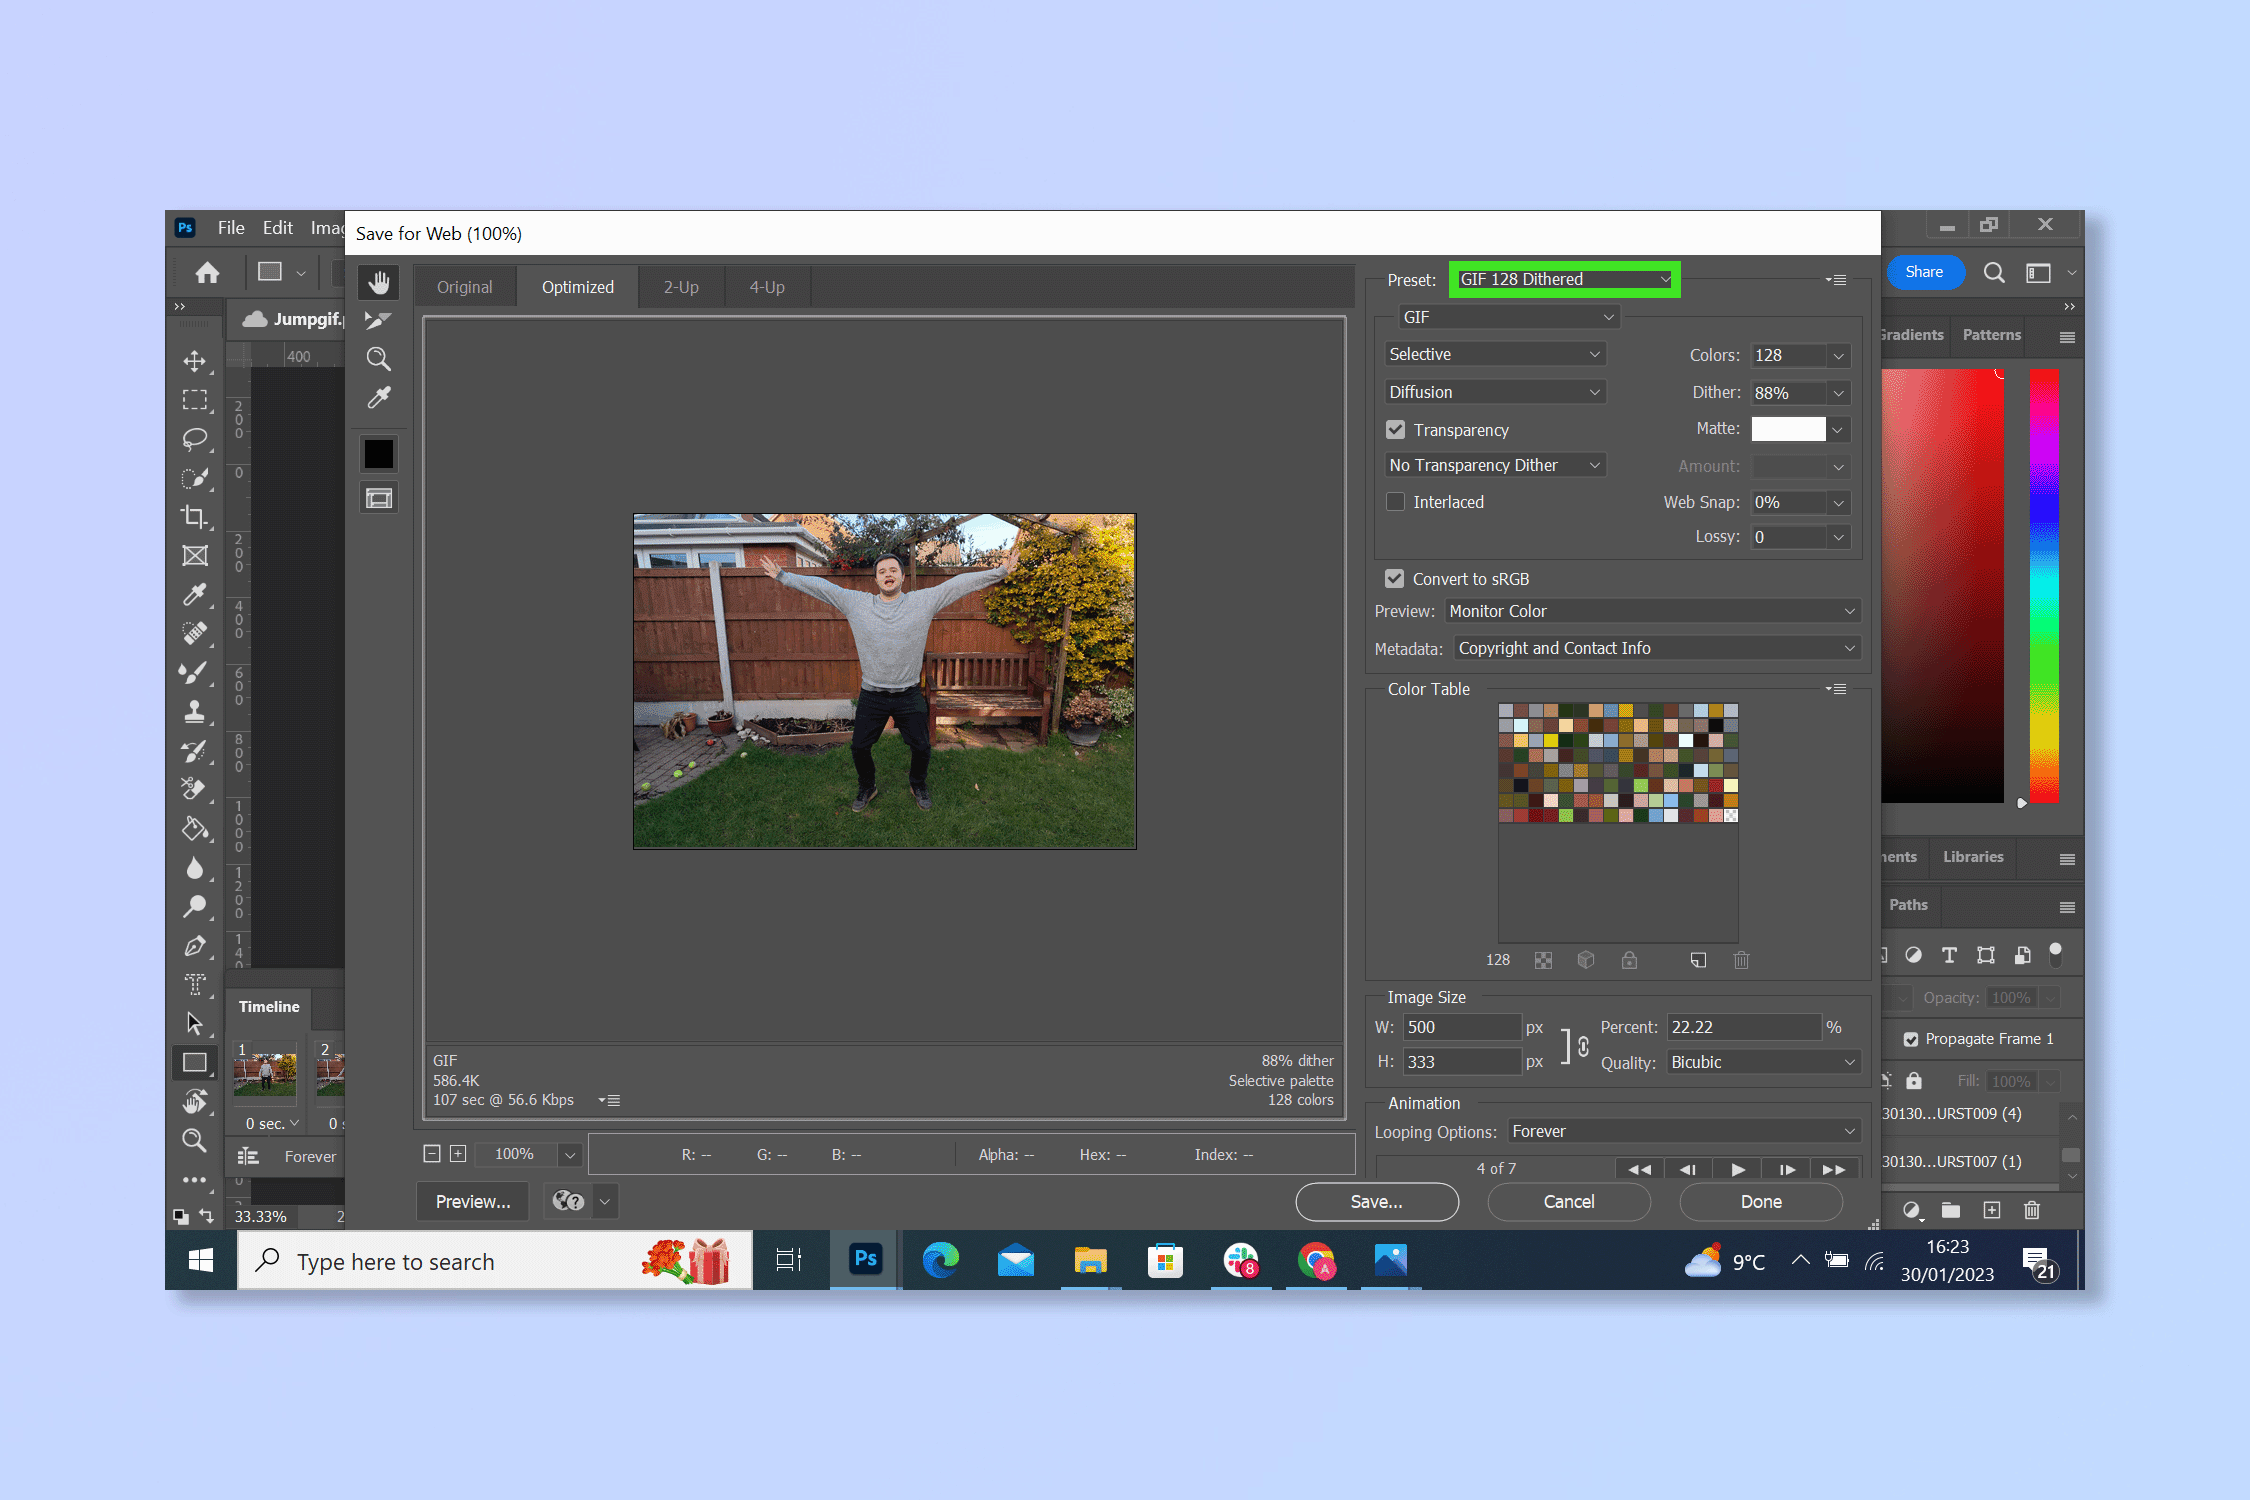 The seventh step to creating a Gif on PhotoShop